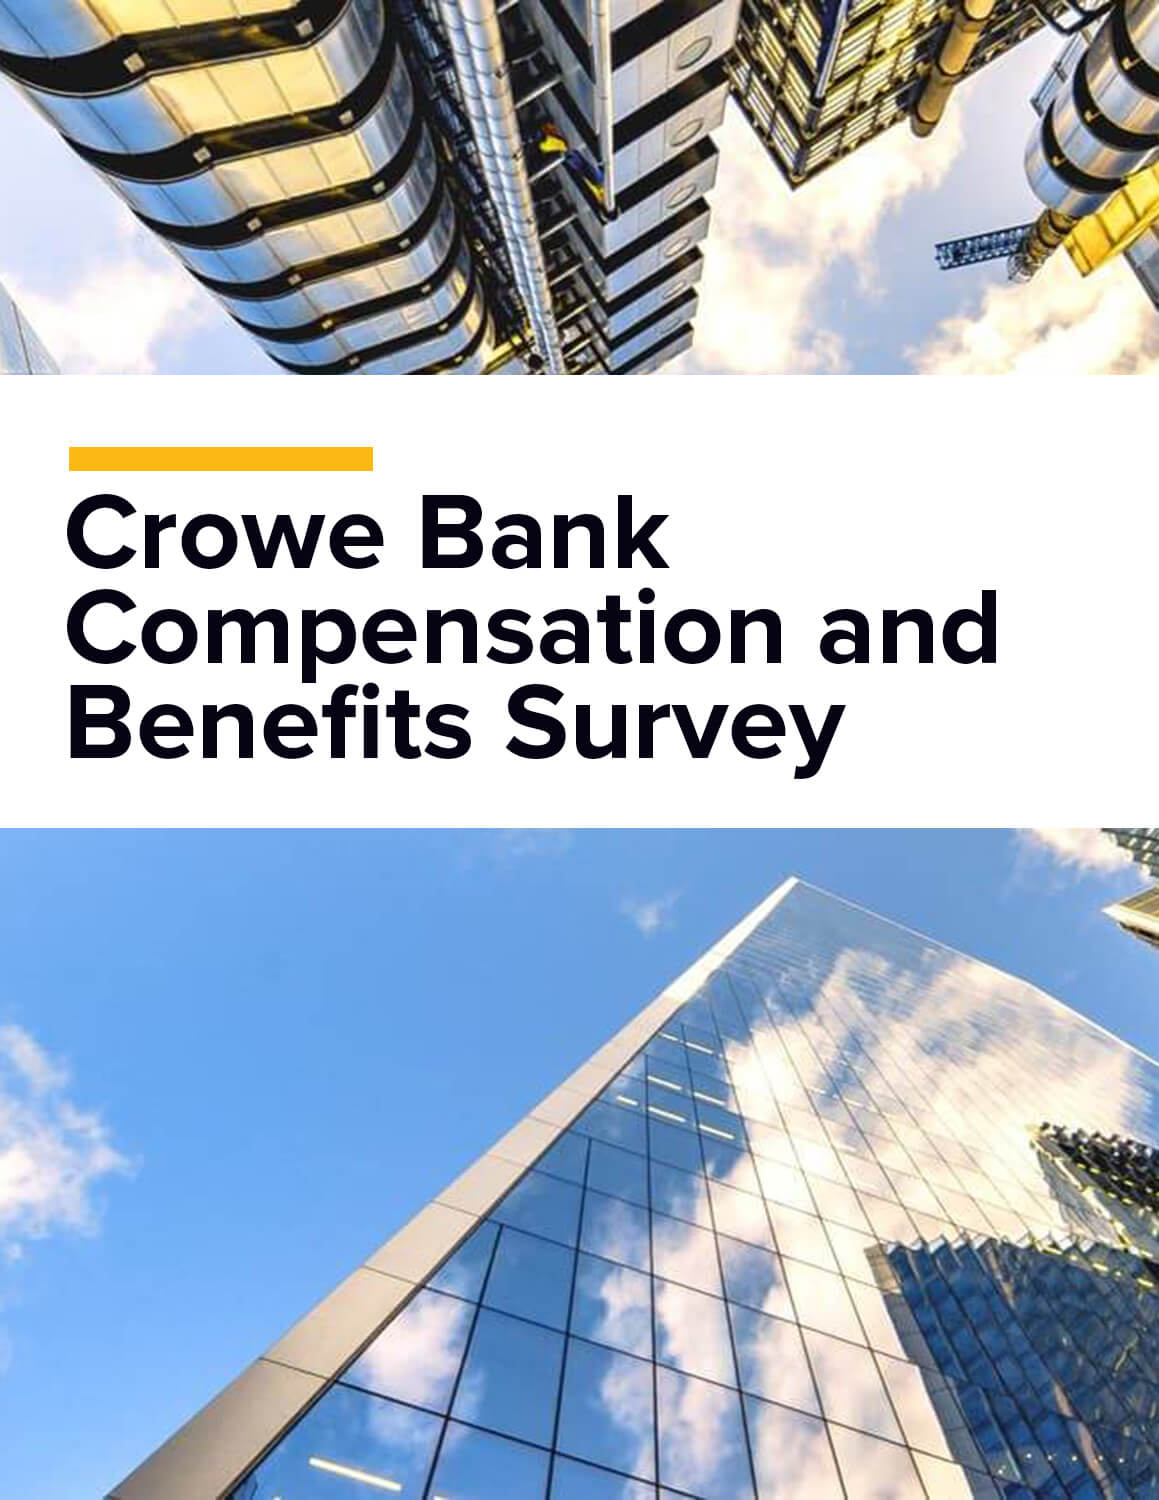 Crowe Bank Compensation and Benefits Survey